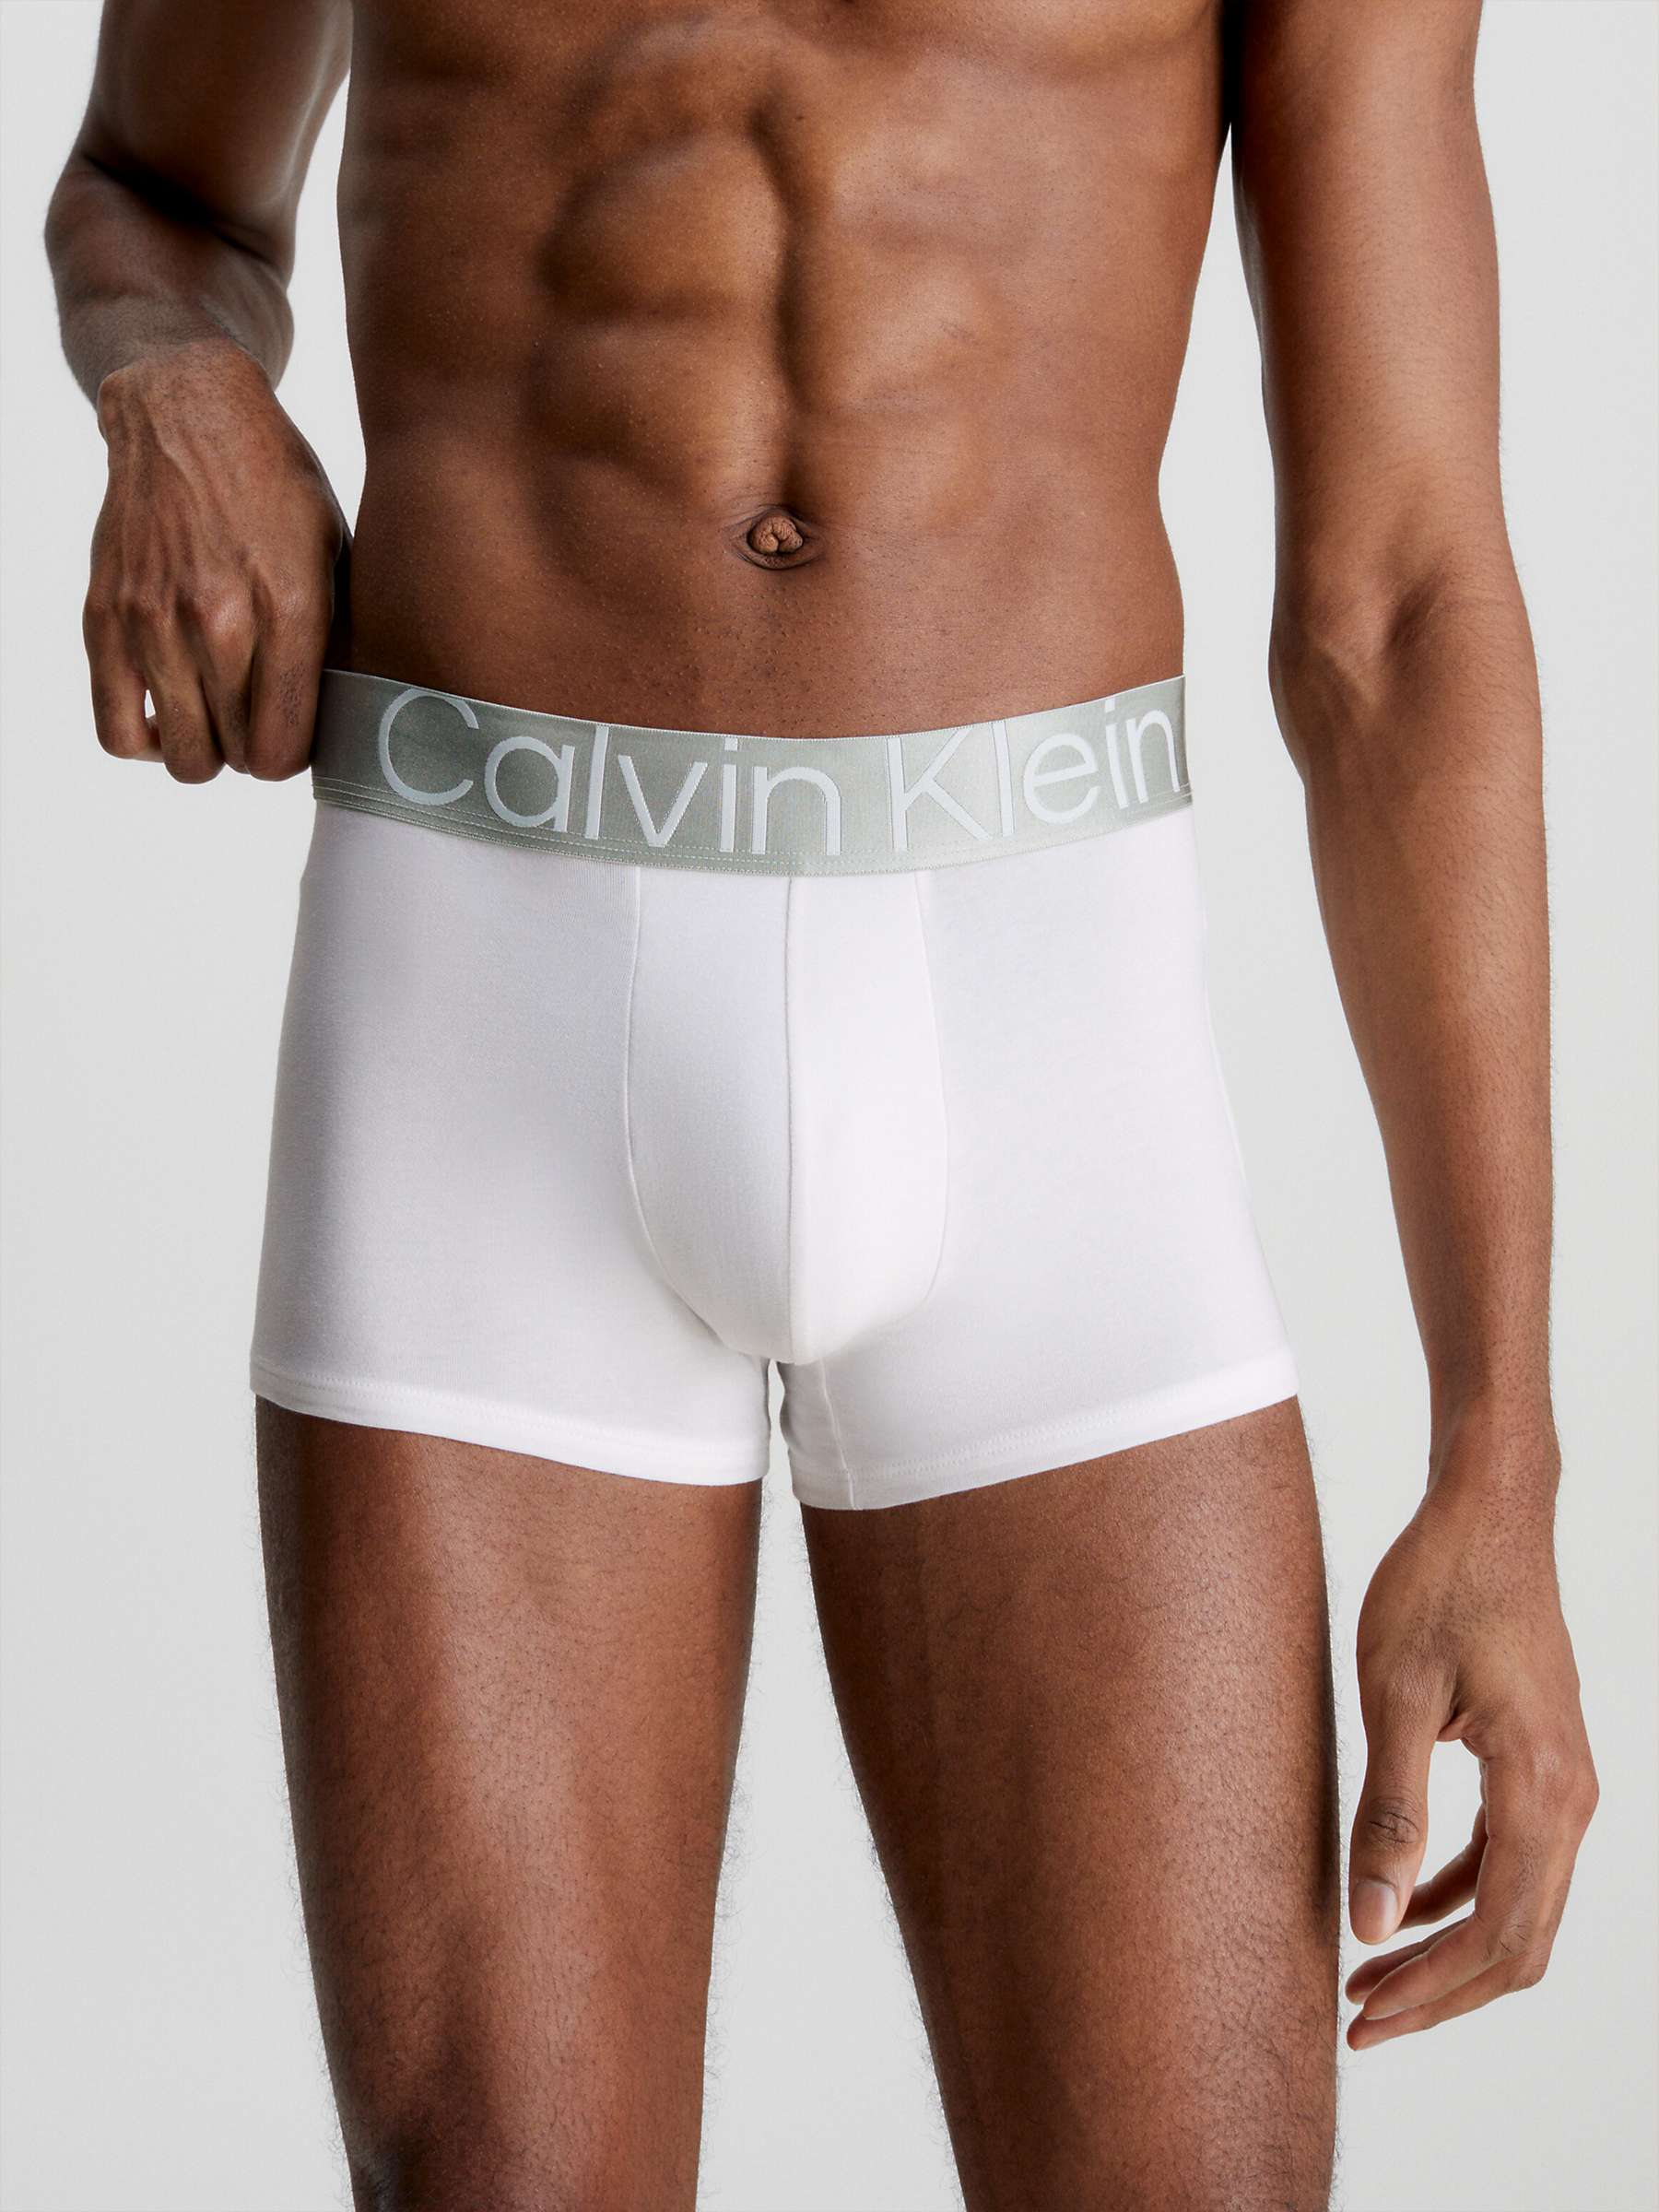 Buy Calvin Klein Recycled Cotton Blend Trunks, Pack of 3 Online at johnlewis.com